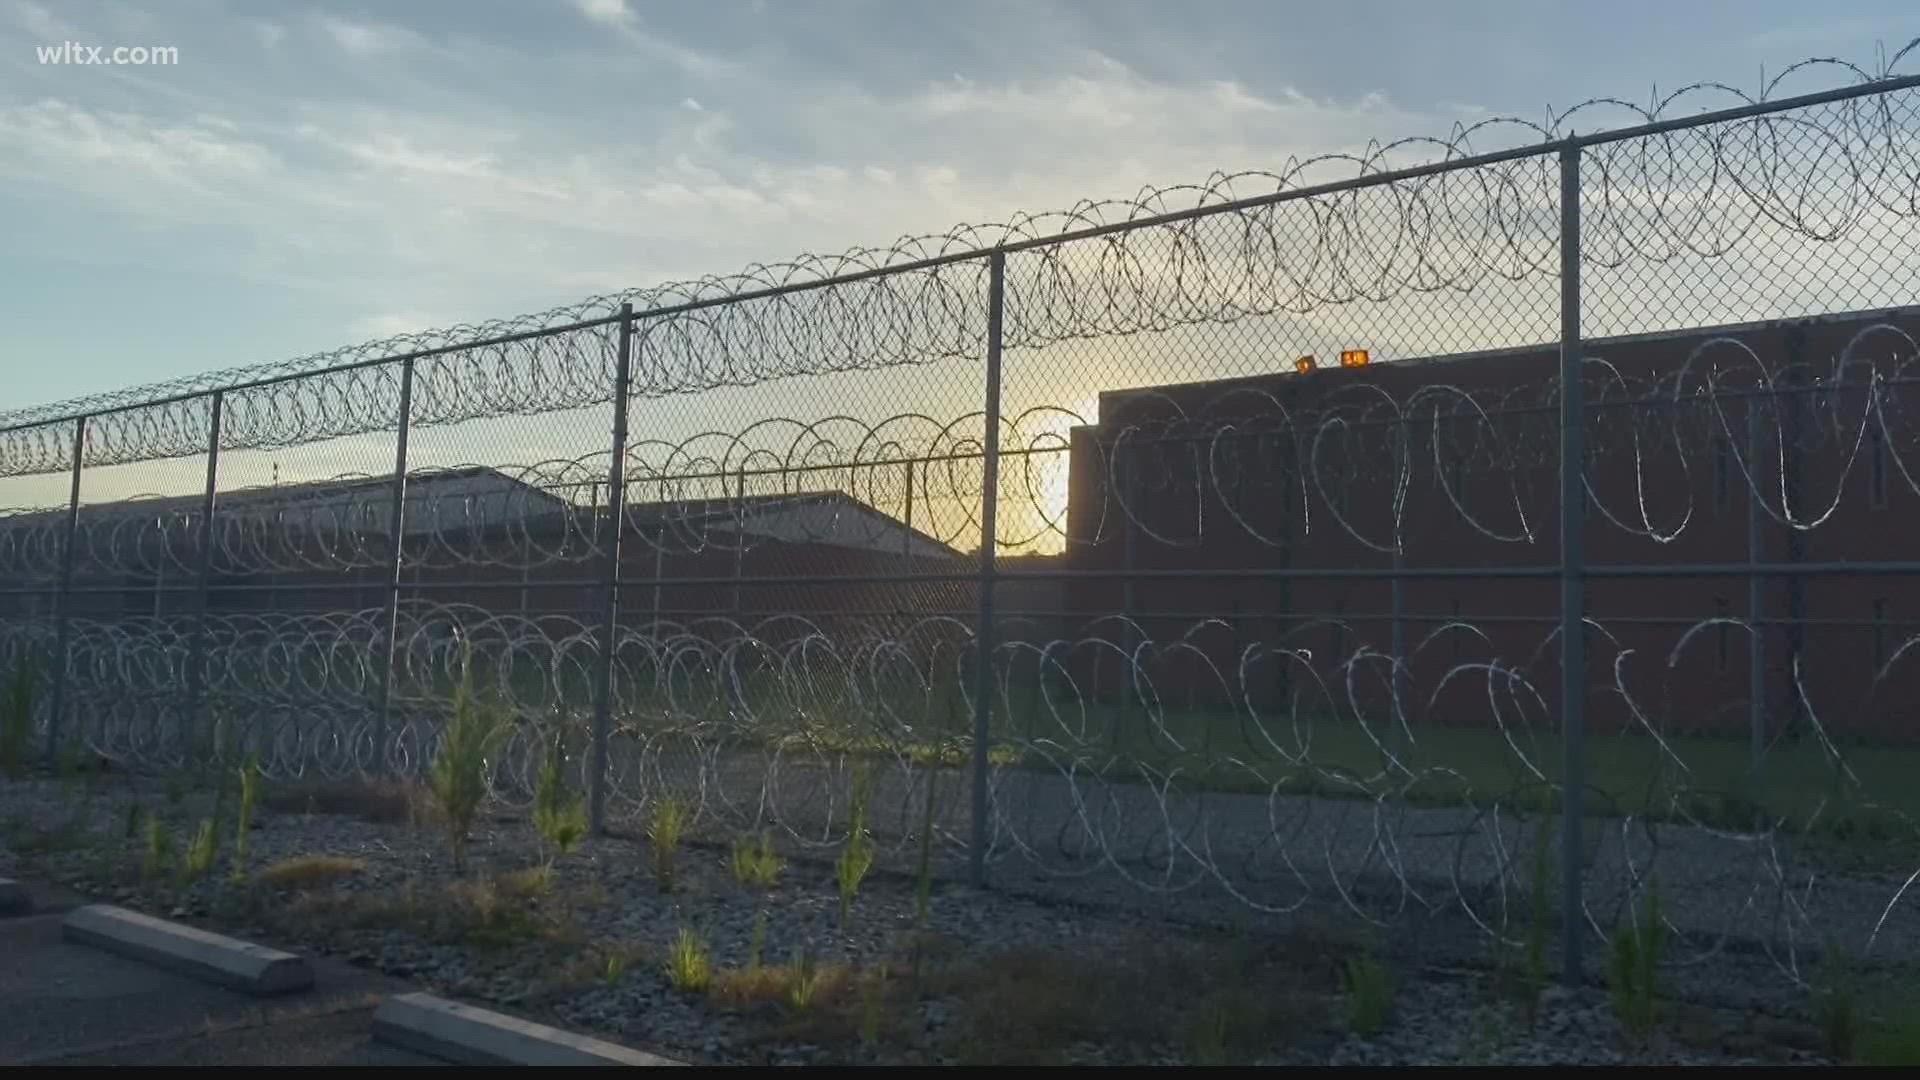 A new detention center director and more strict policies could mean big changes at Alvin S. Glenn Detention Center in Richland County.